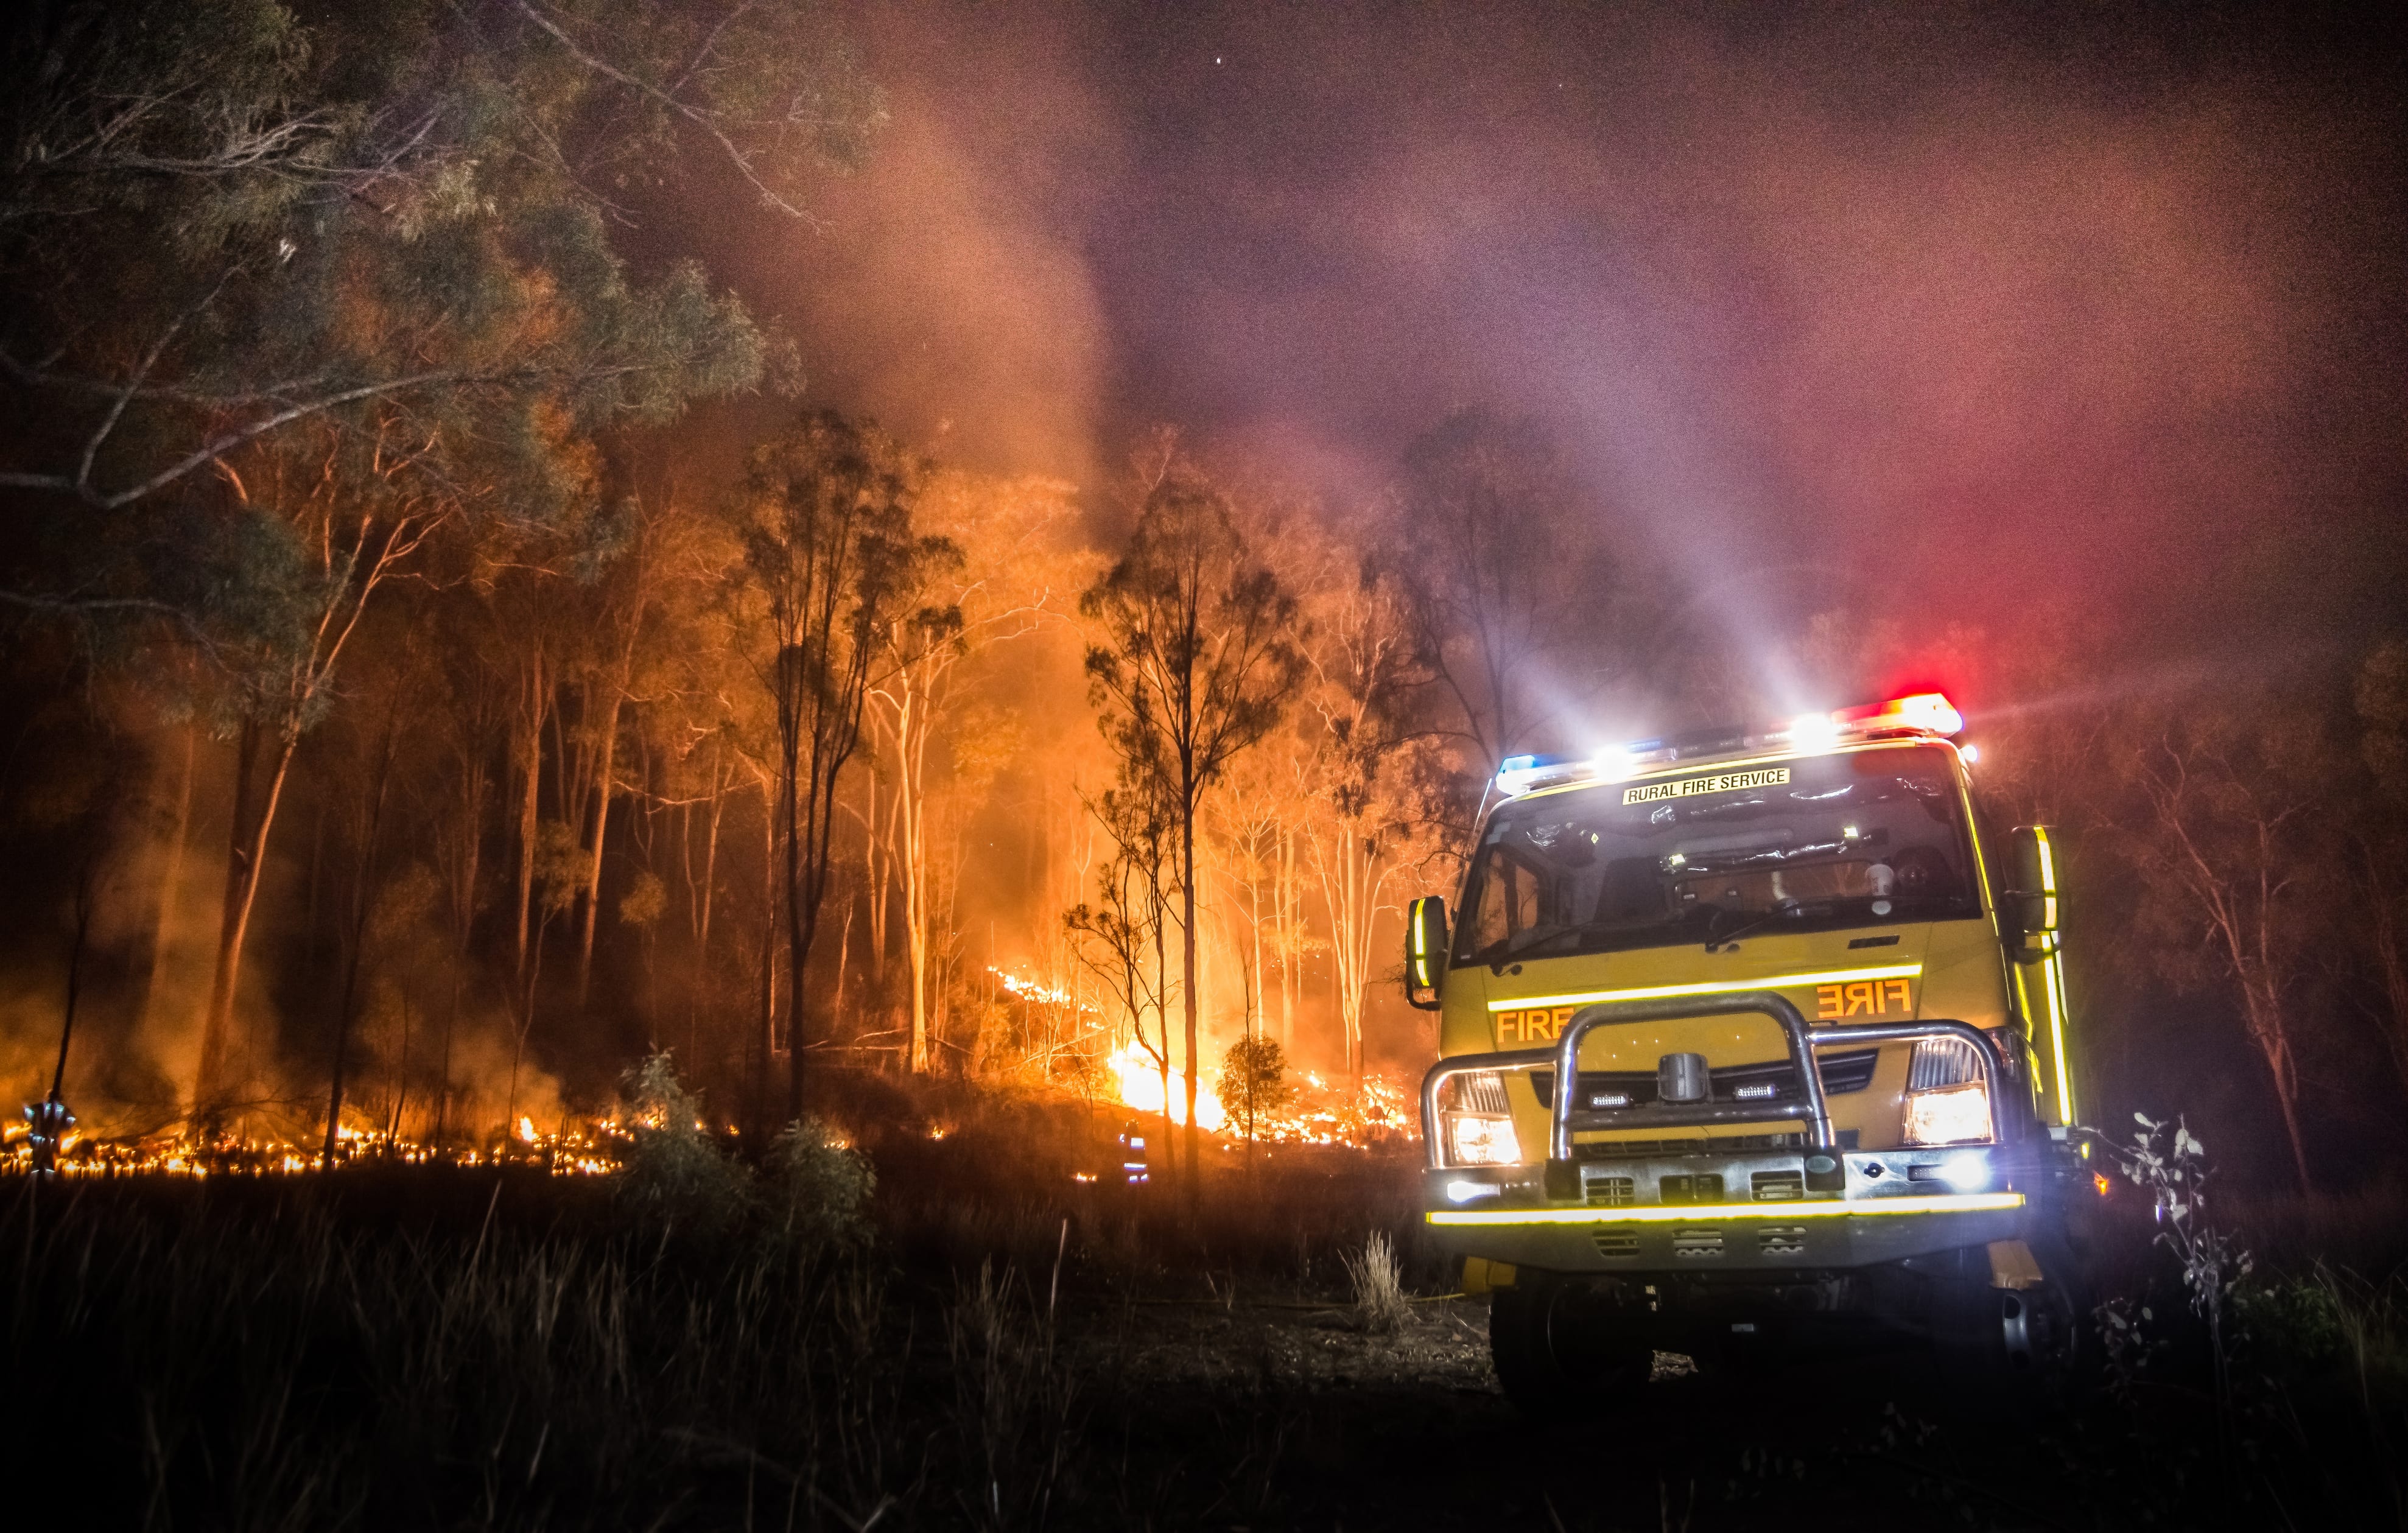 Buying or selling a property affected by bushfire – what is your legal position?